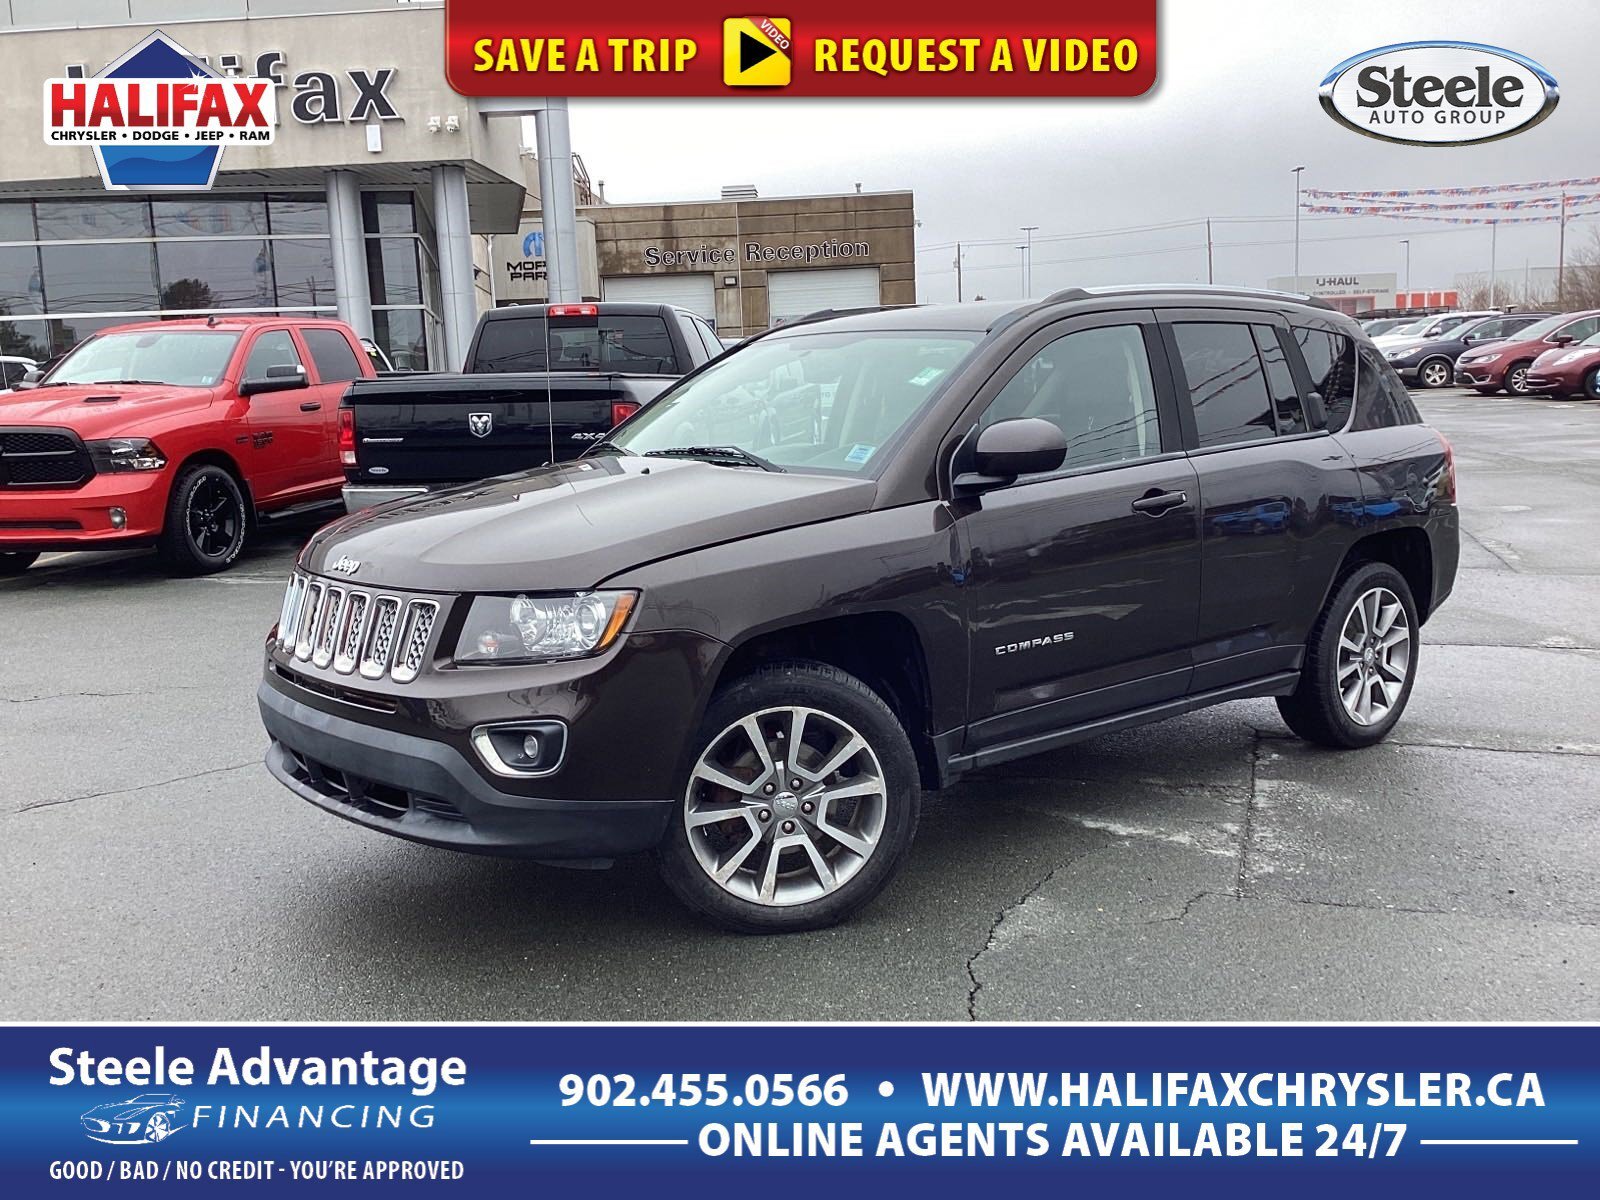 2014 Jeep Compass Limited - LOW KM, HEATED LEATHER SEATS, POWER EQUI